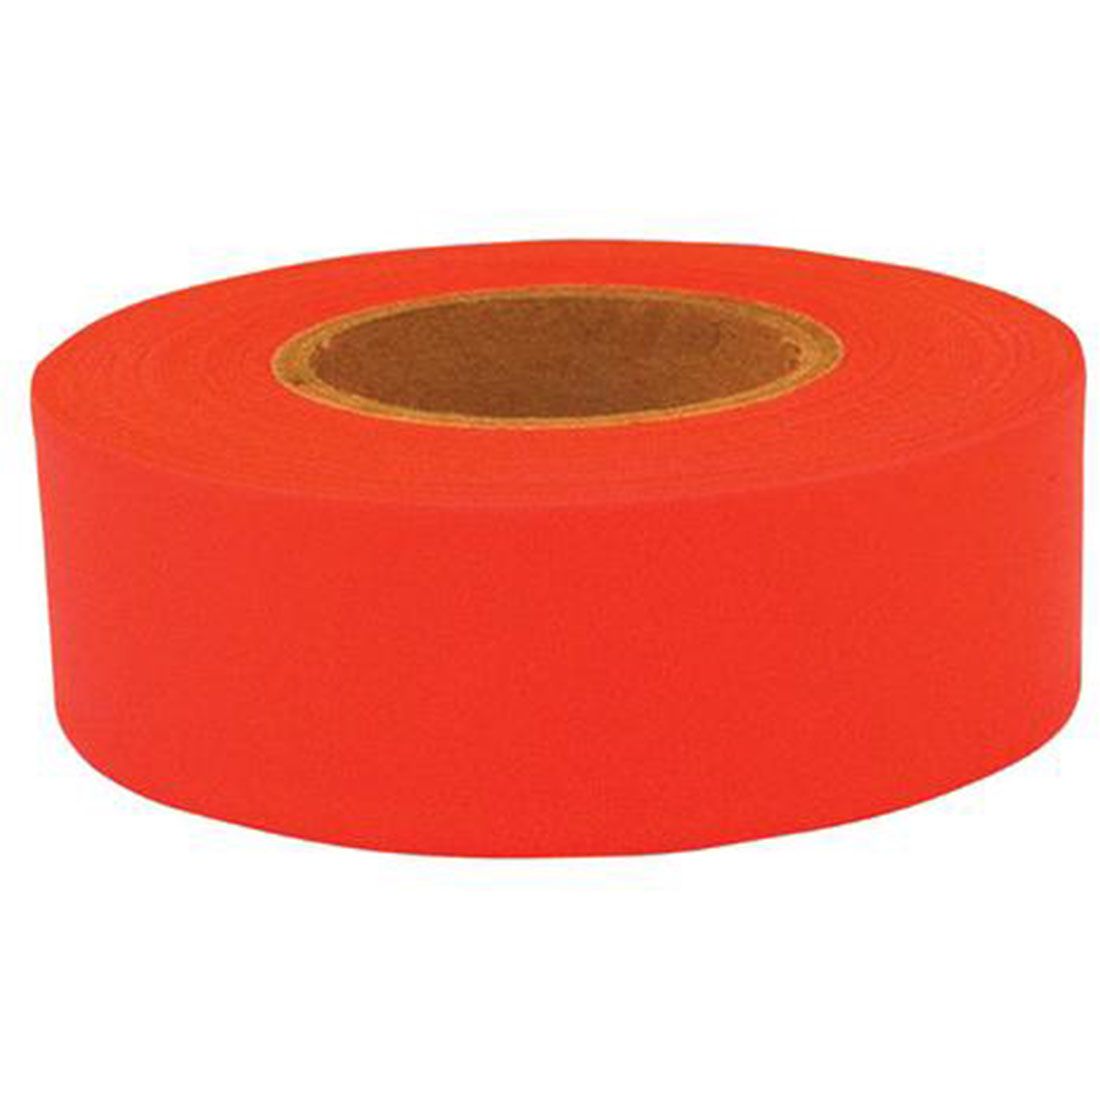 Flagging Construction Surveyors Tape Red C.H x 1 3/16 in Hanson 300 ft 